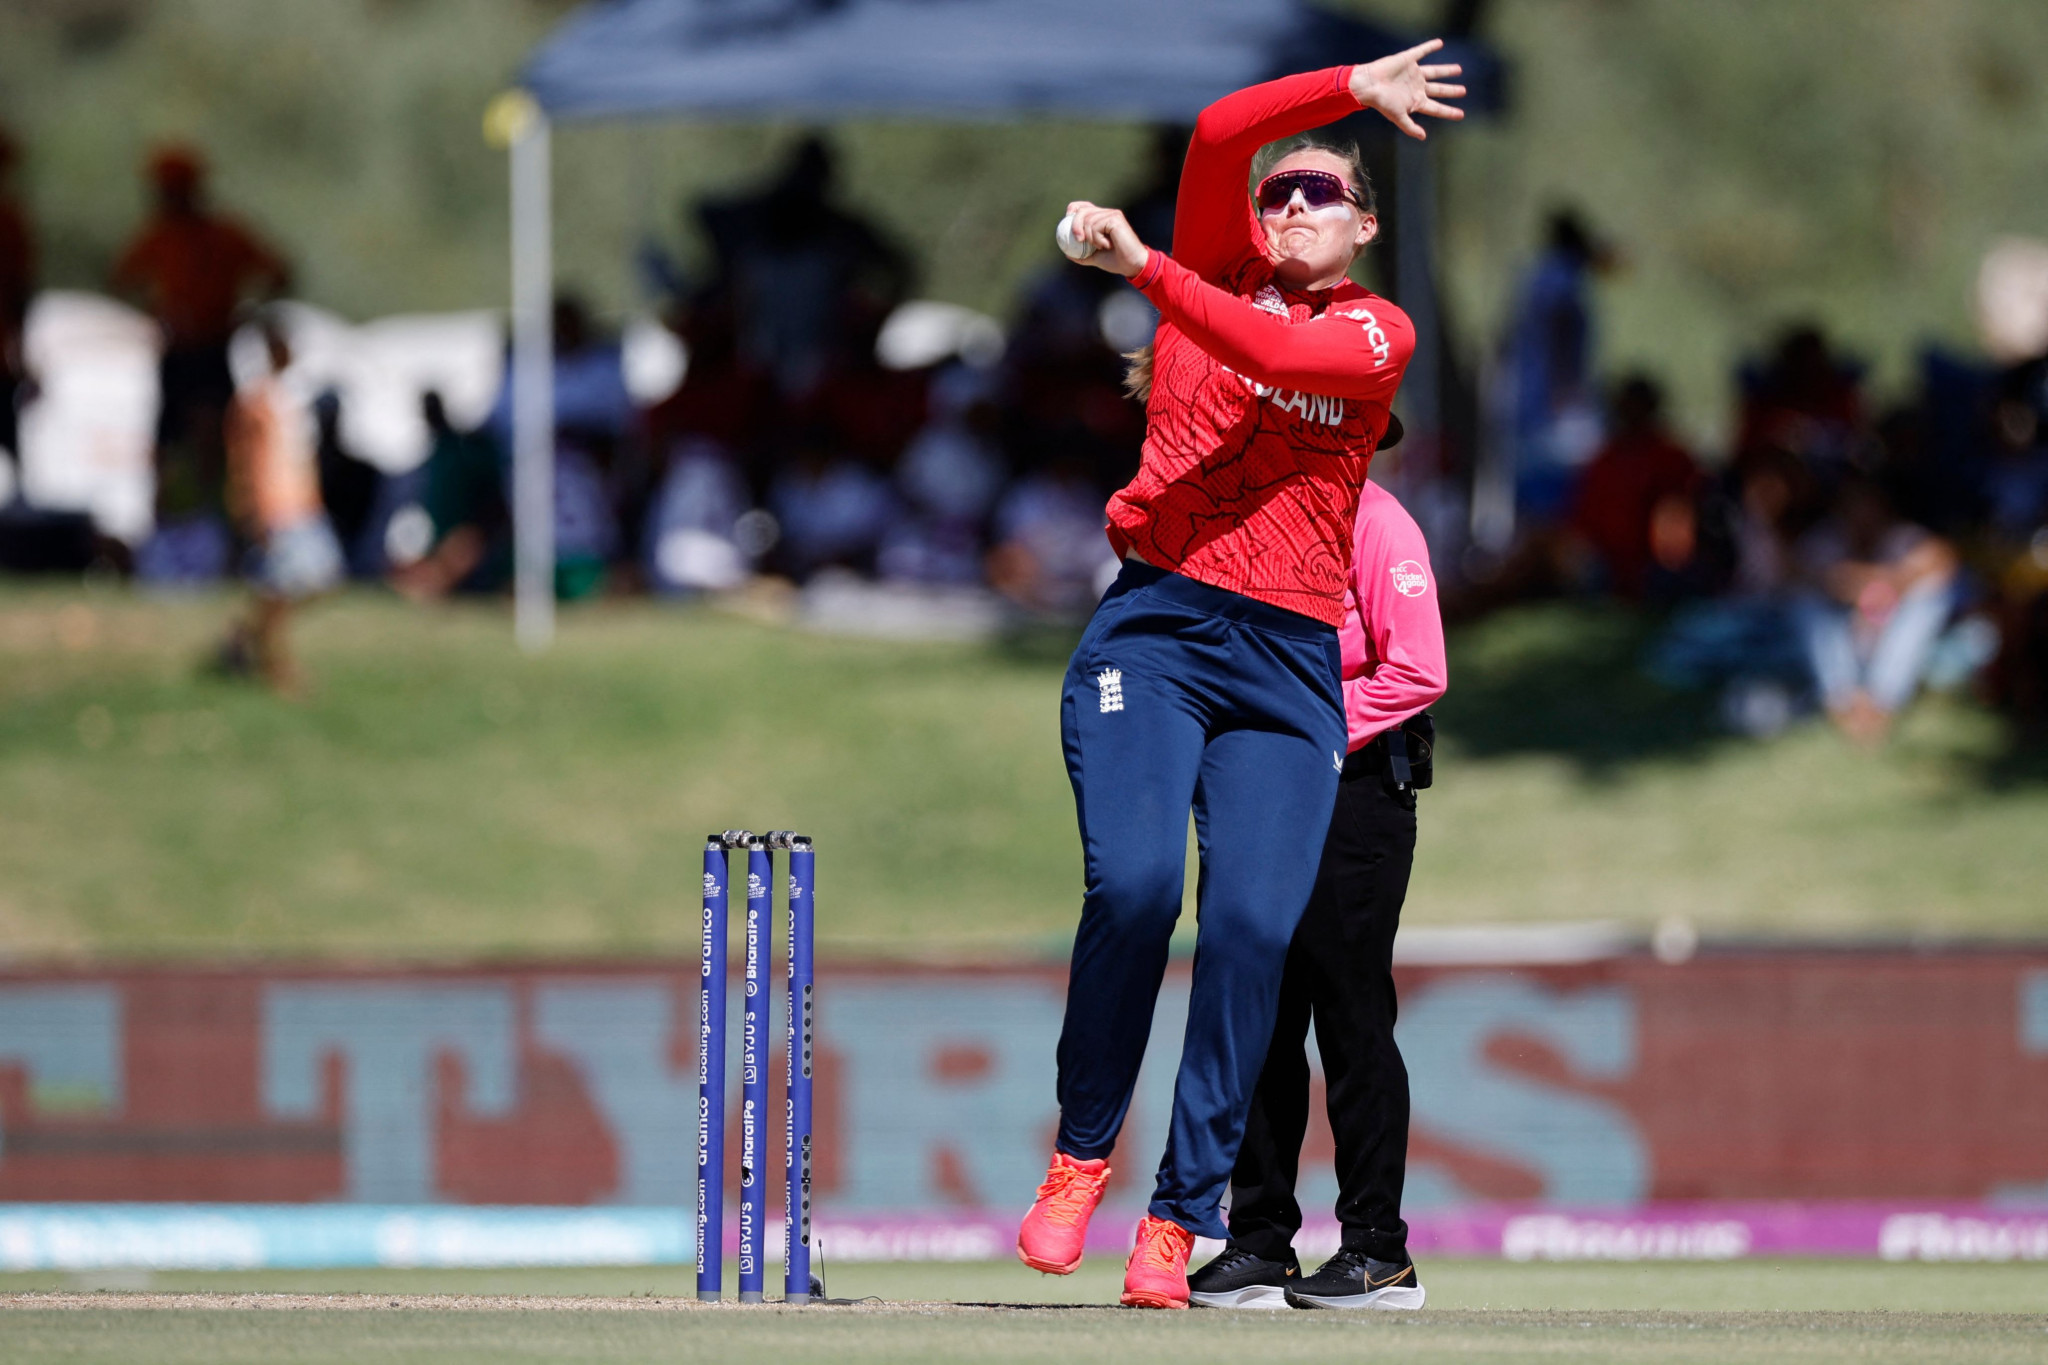 The world's top-ranked women's T20 international bowler Sophie Ecclestone took three wickets for England as they beat the West Indies ©Getty Images